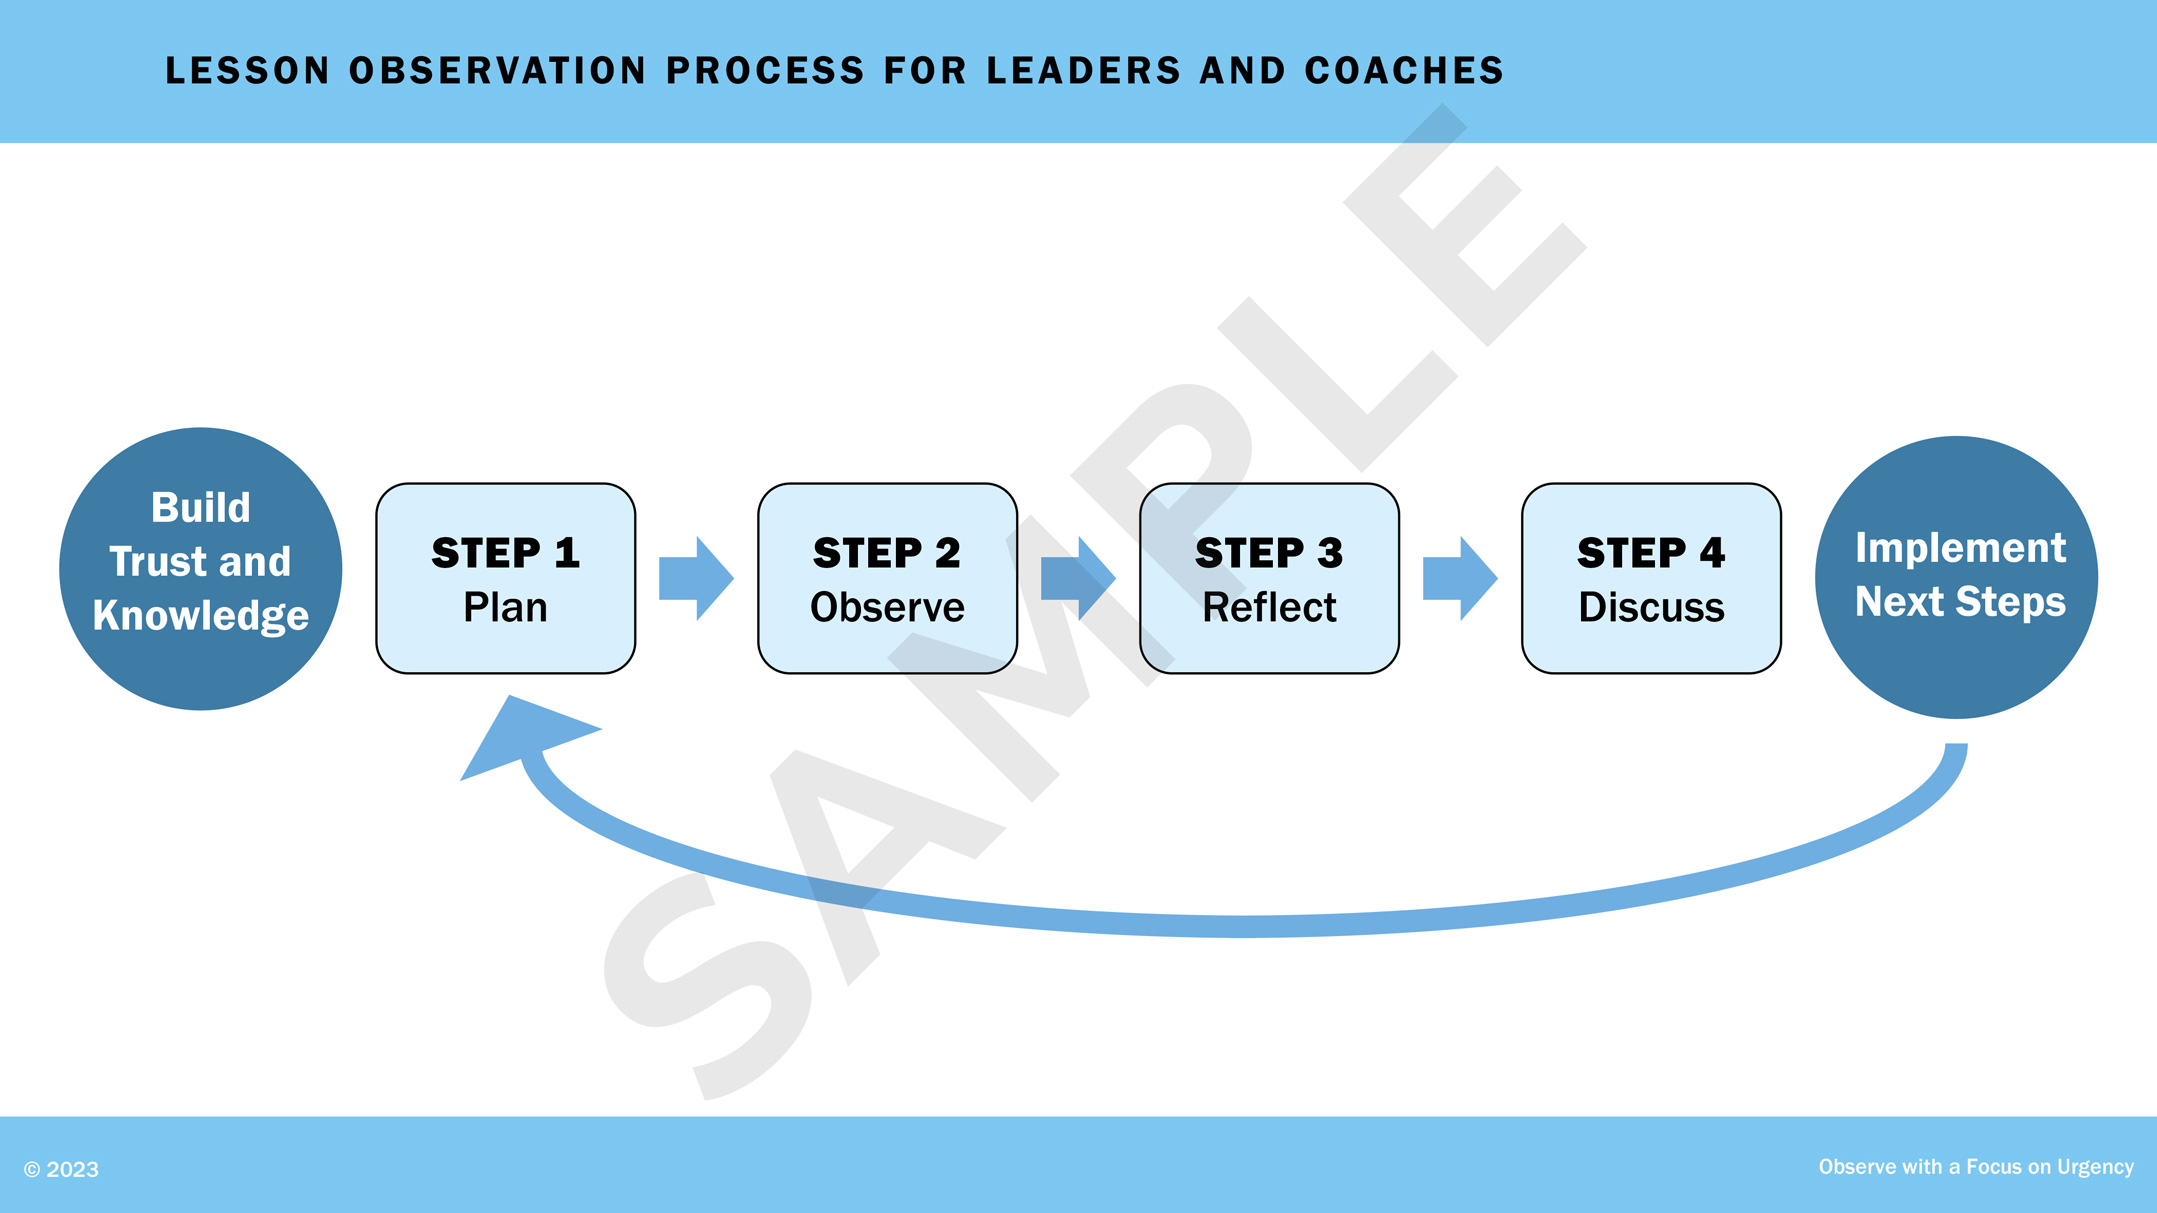 Slide from a PowerPoint presentation for a learning series for teachers. A flow chart shows the steps in the lesson observation process: build trust and knowledge, plan, observe, reflect, discuss, and implement next steps.